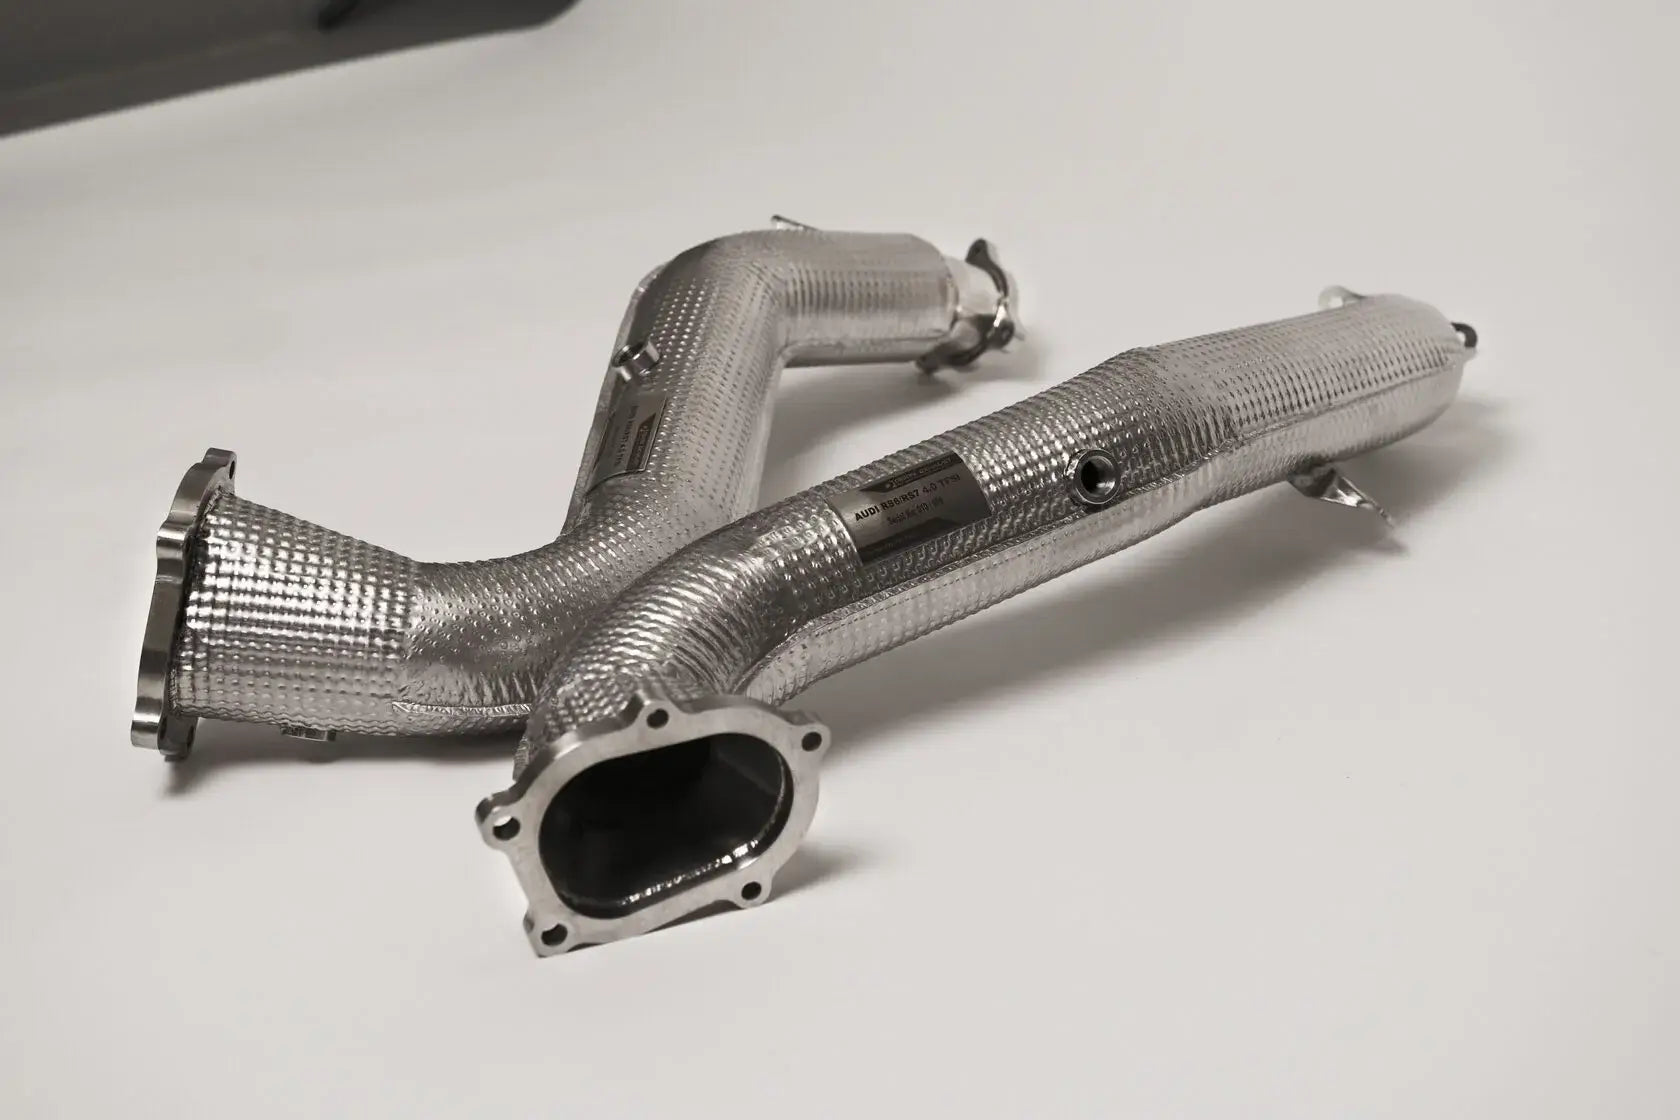 DEIKIN 10-AUDI.RS6.C7-DPT Downpipe for AUDI RS6 (C7) with thermal insulation HeatShield Photo-4 